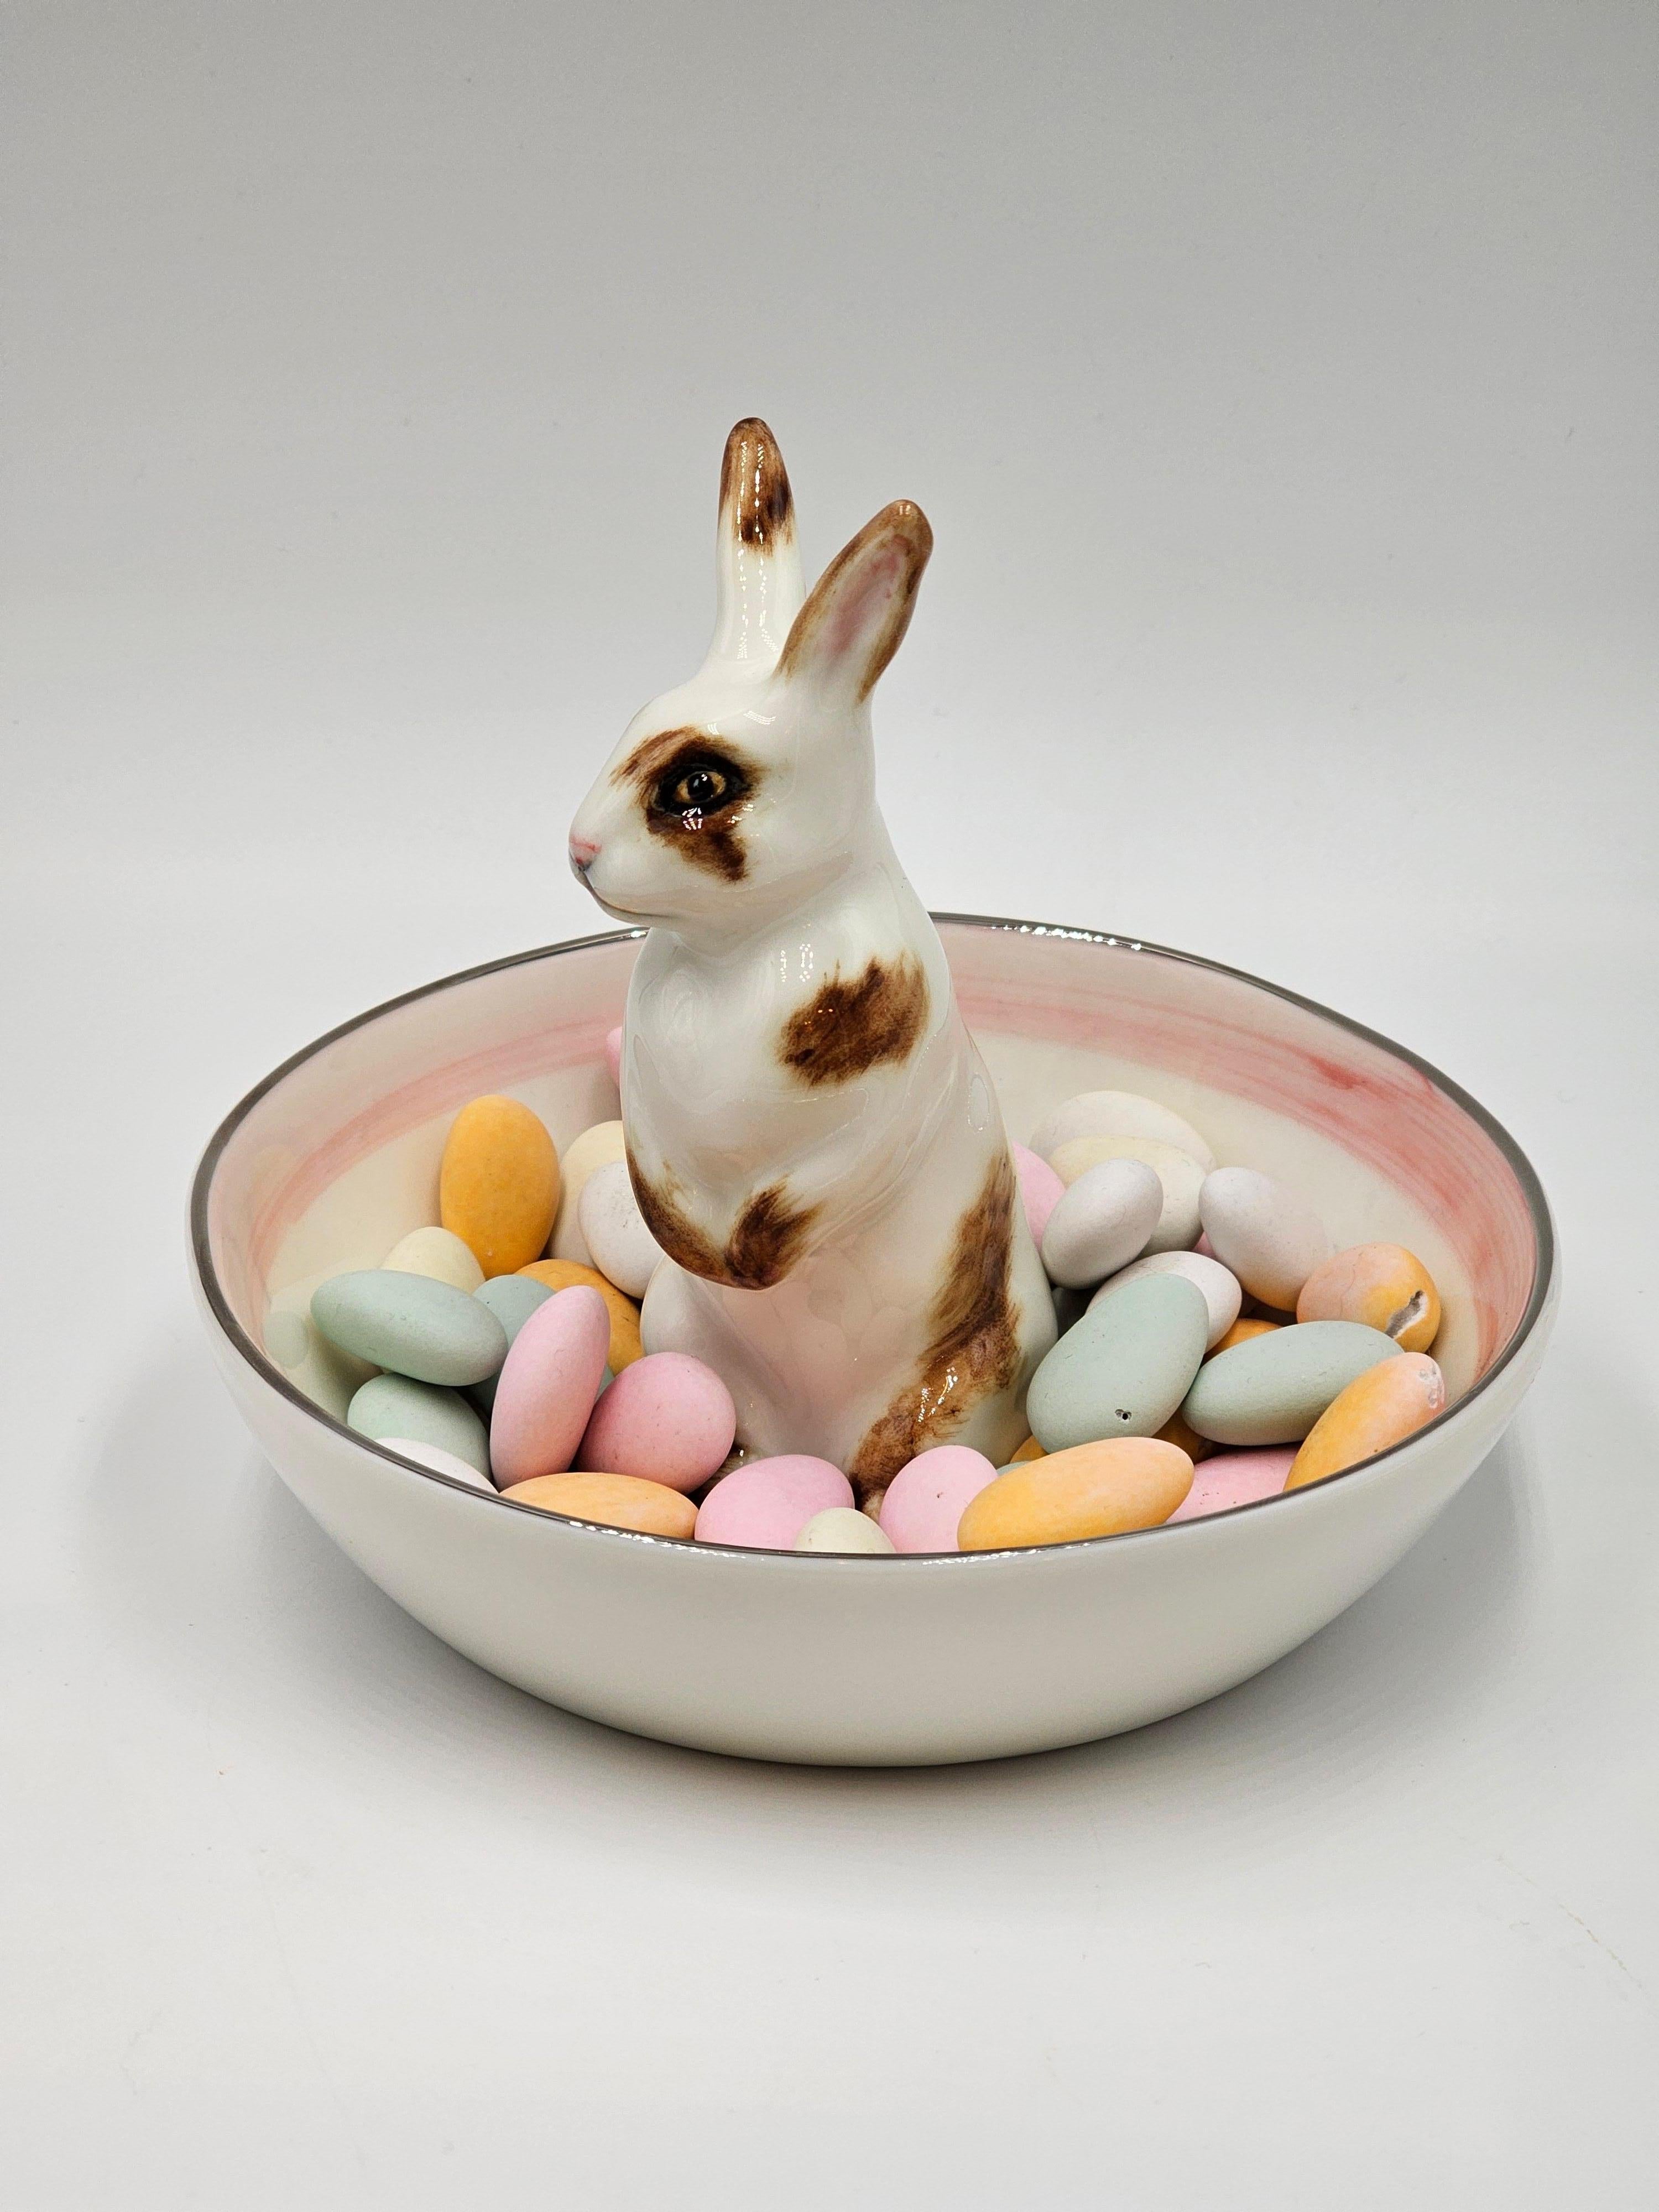 Completely handmade porcelain bowl with a hands-free naturalistic painted Easter hare figure with brown spots. The bunny is sitting in the middle of the bowl for decorating nuts or sweets around.
The dish inside is handsfree painted with colorful